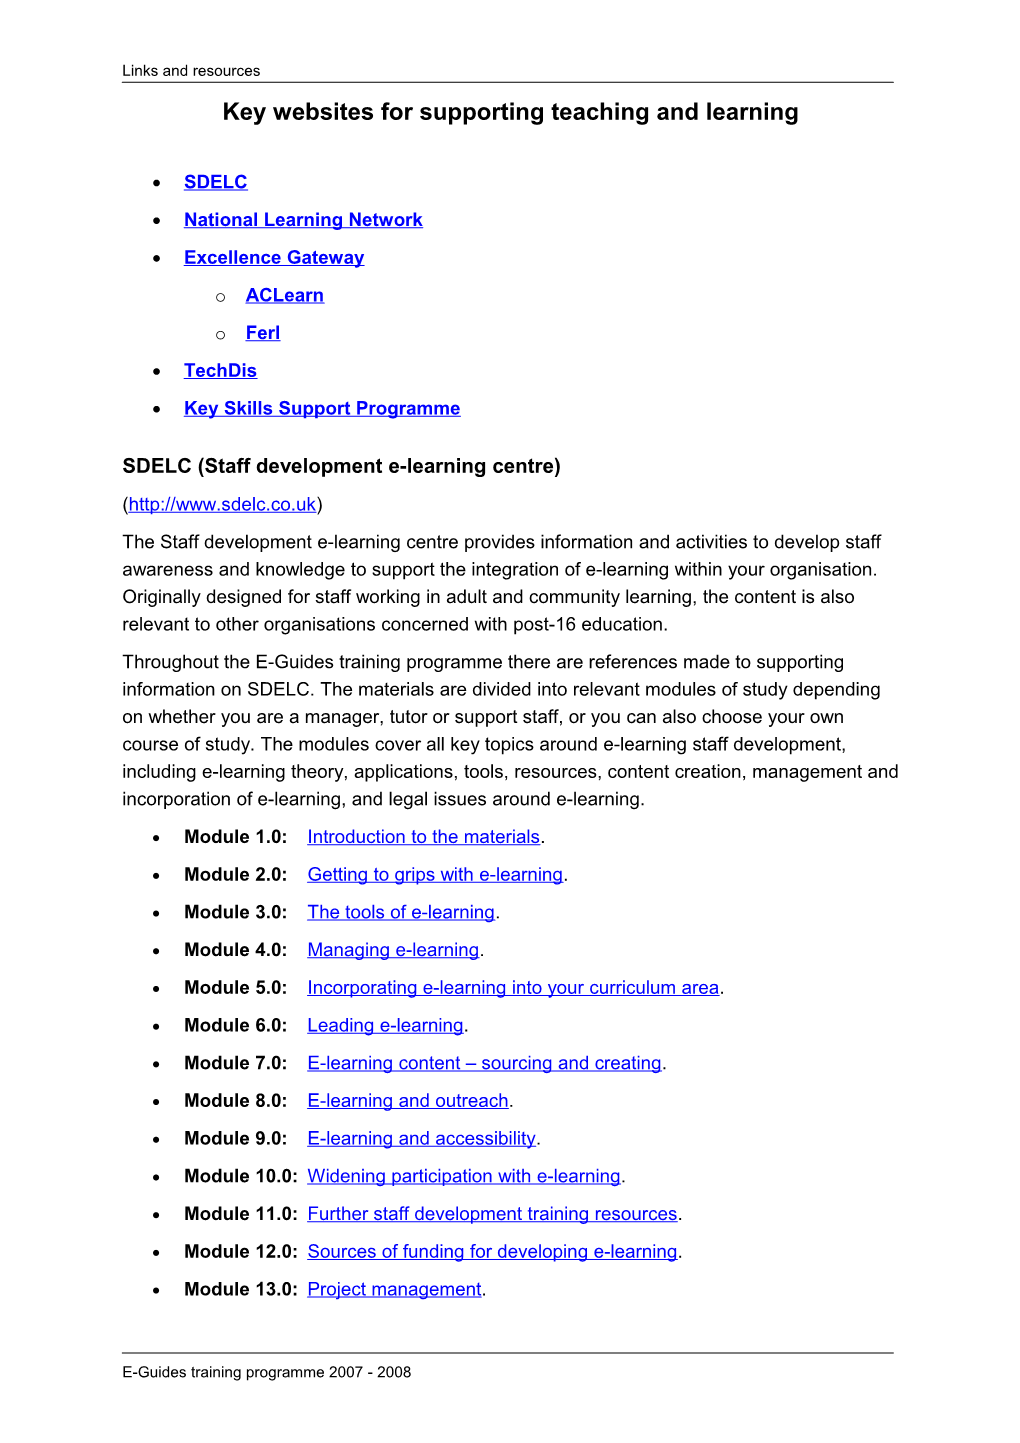 Key Websites for Supporting Teaching and Learning